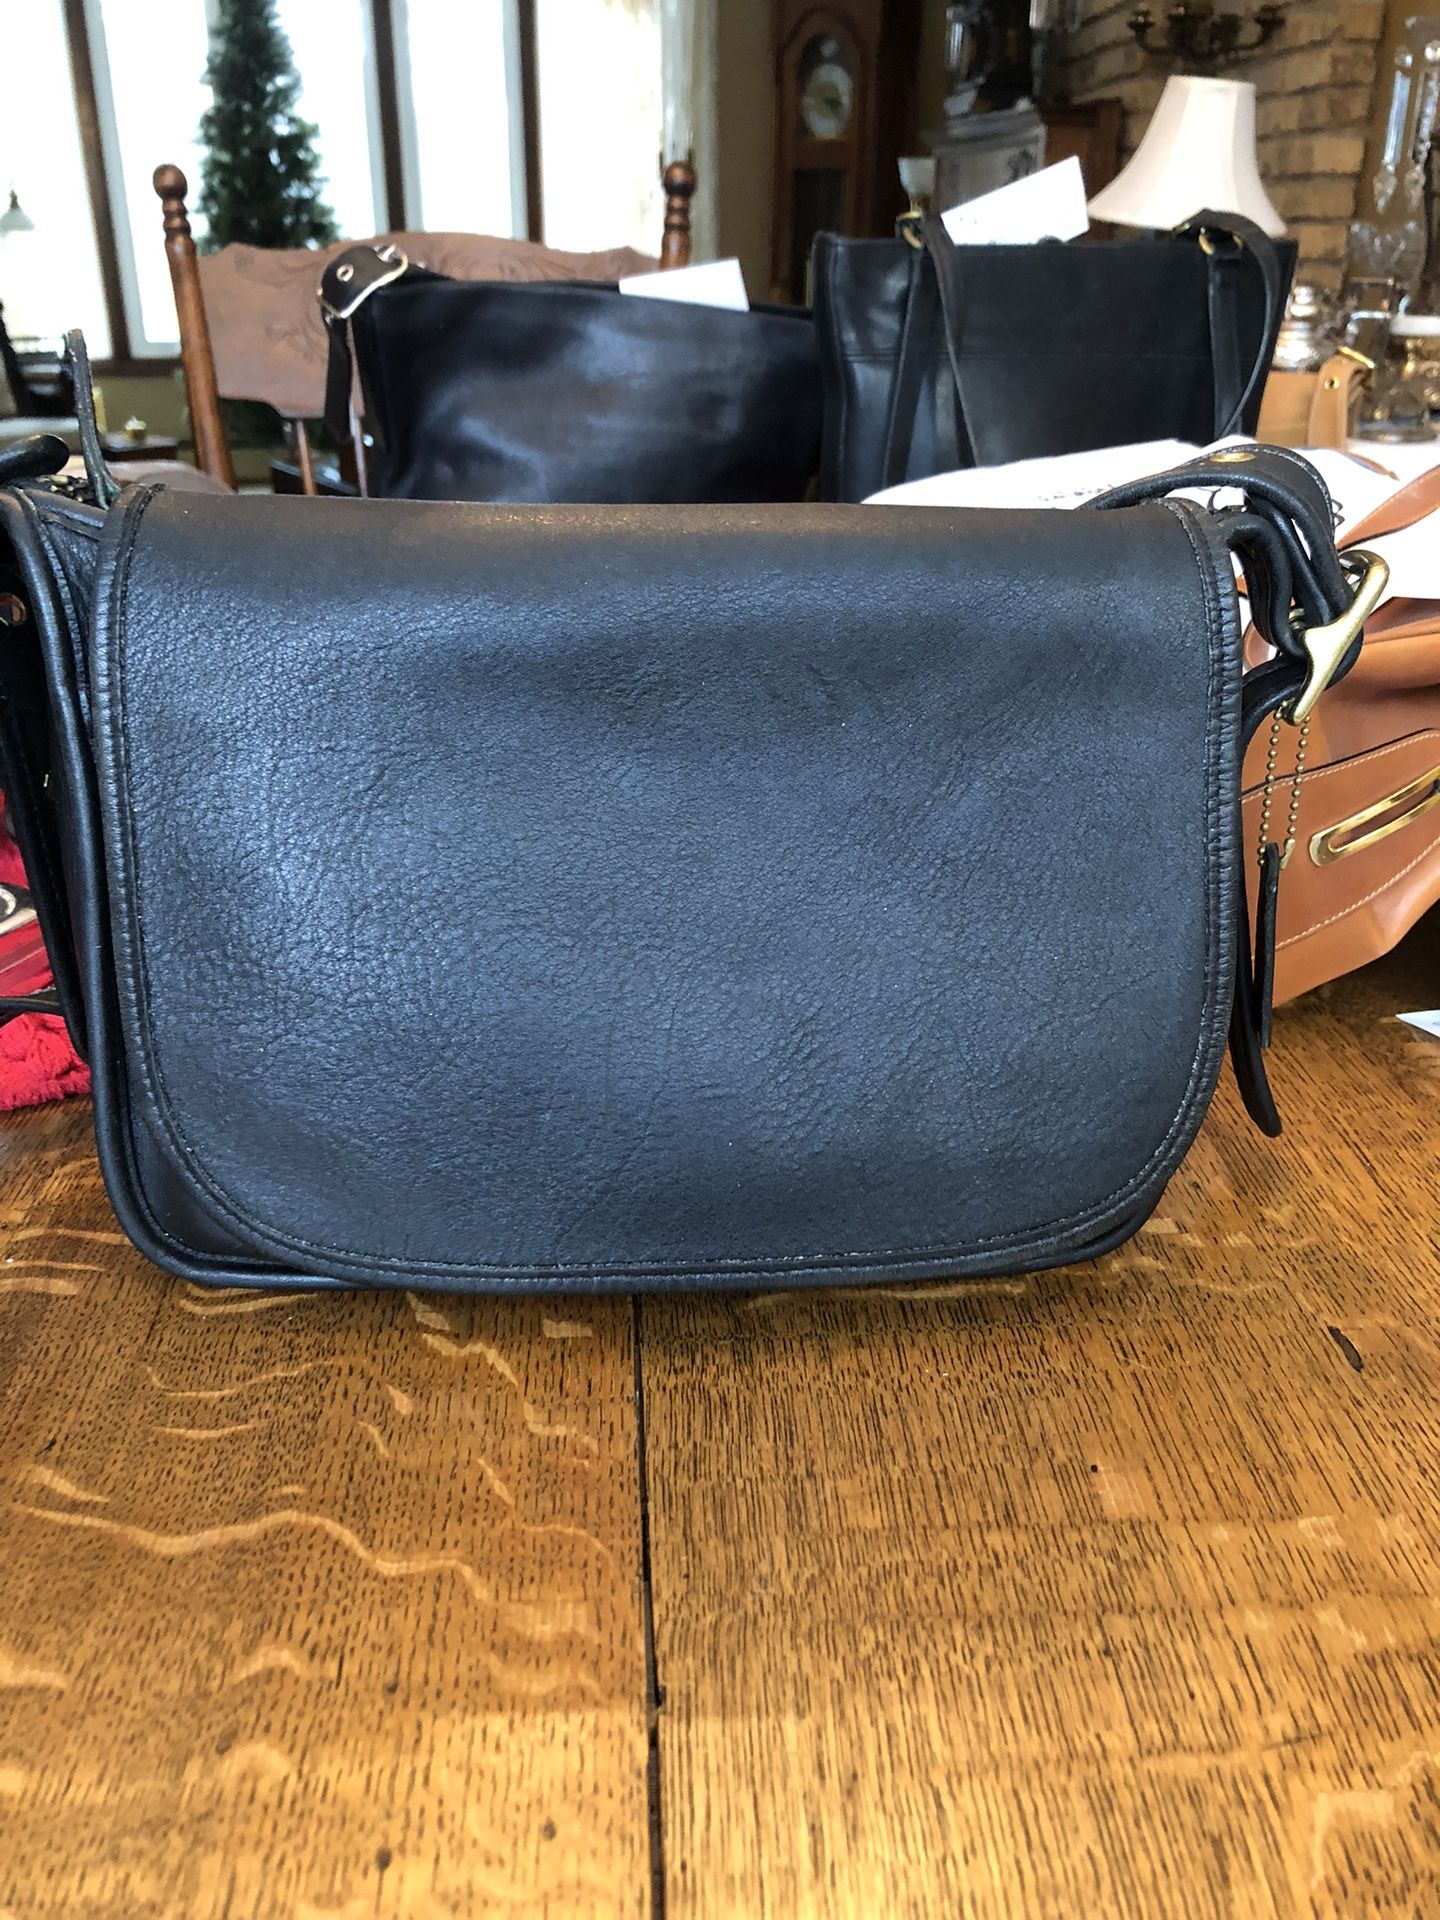 Vintage Coach Patricia’s Legacy Black Leather Shoulder/Crossbody Purse Made In US Cash/Venmo Pickup White Bear Lake Home 